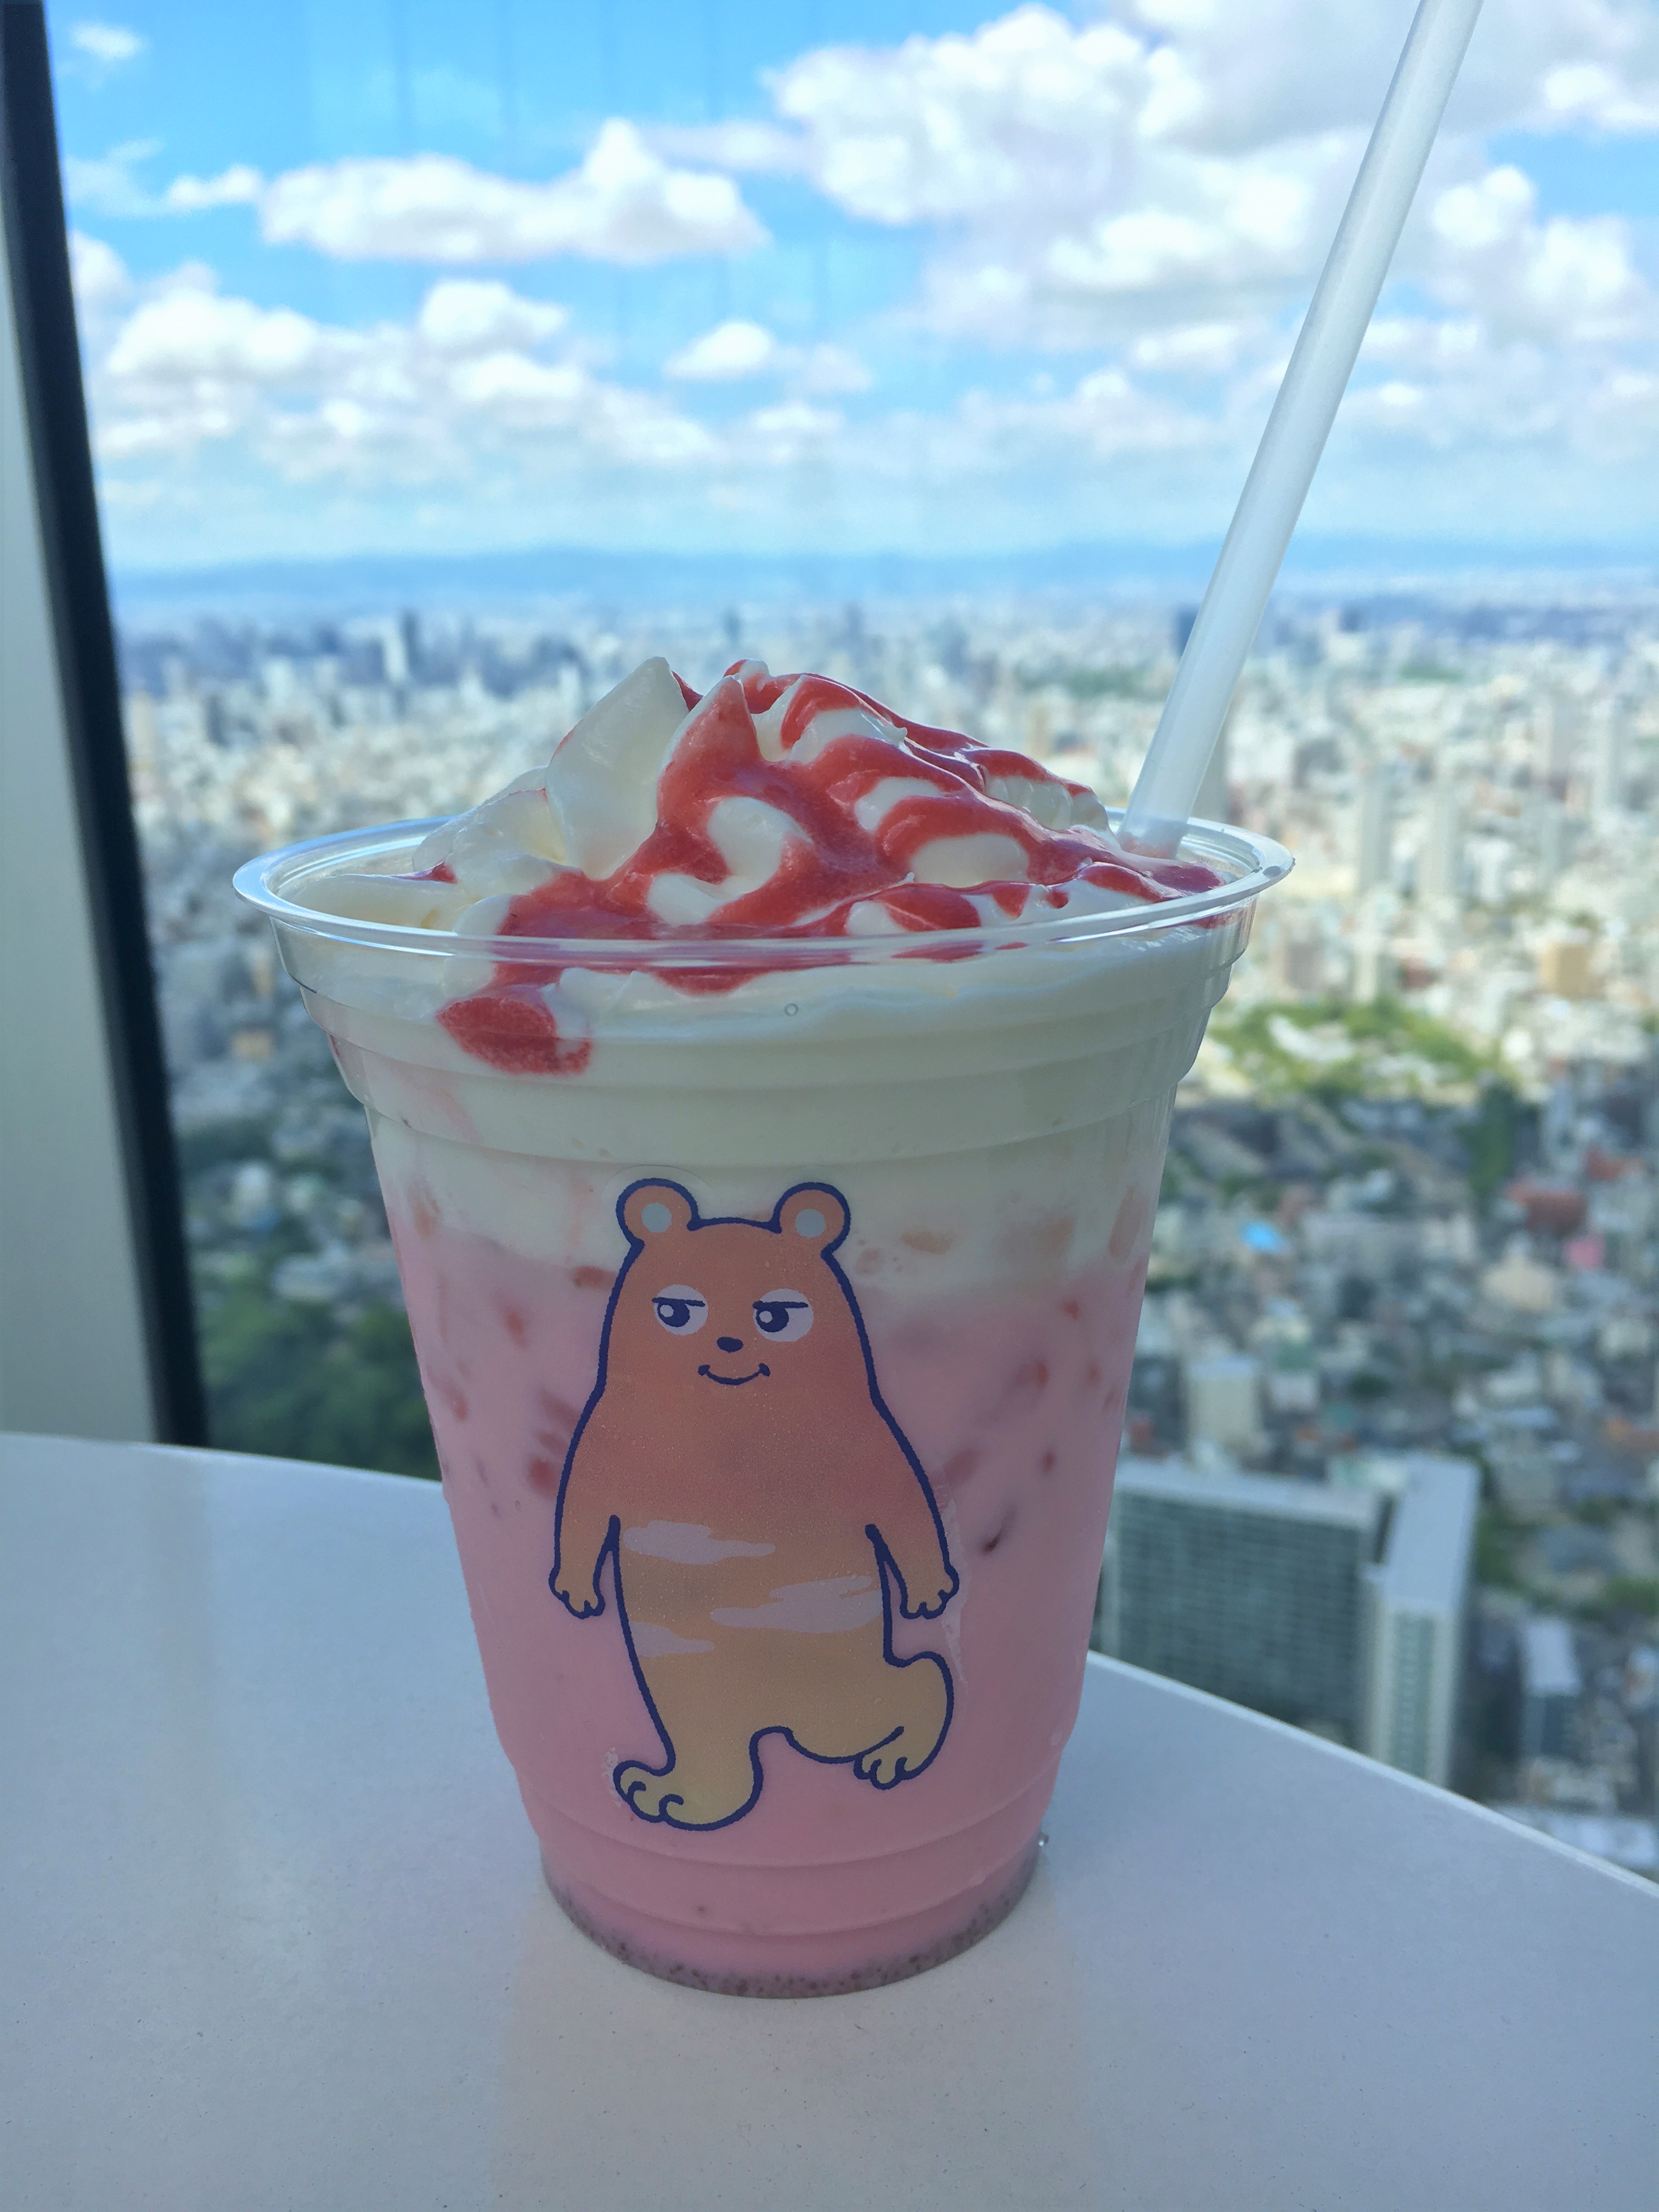 pink strawberry flavored latte with a picture of abeno bear on the cup